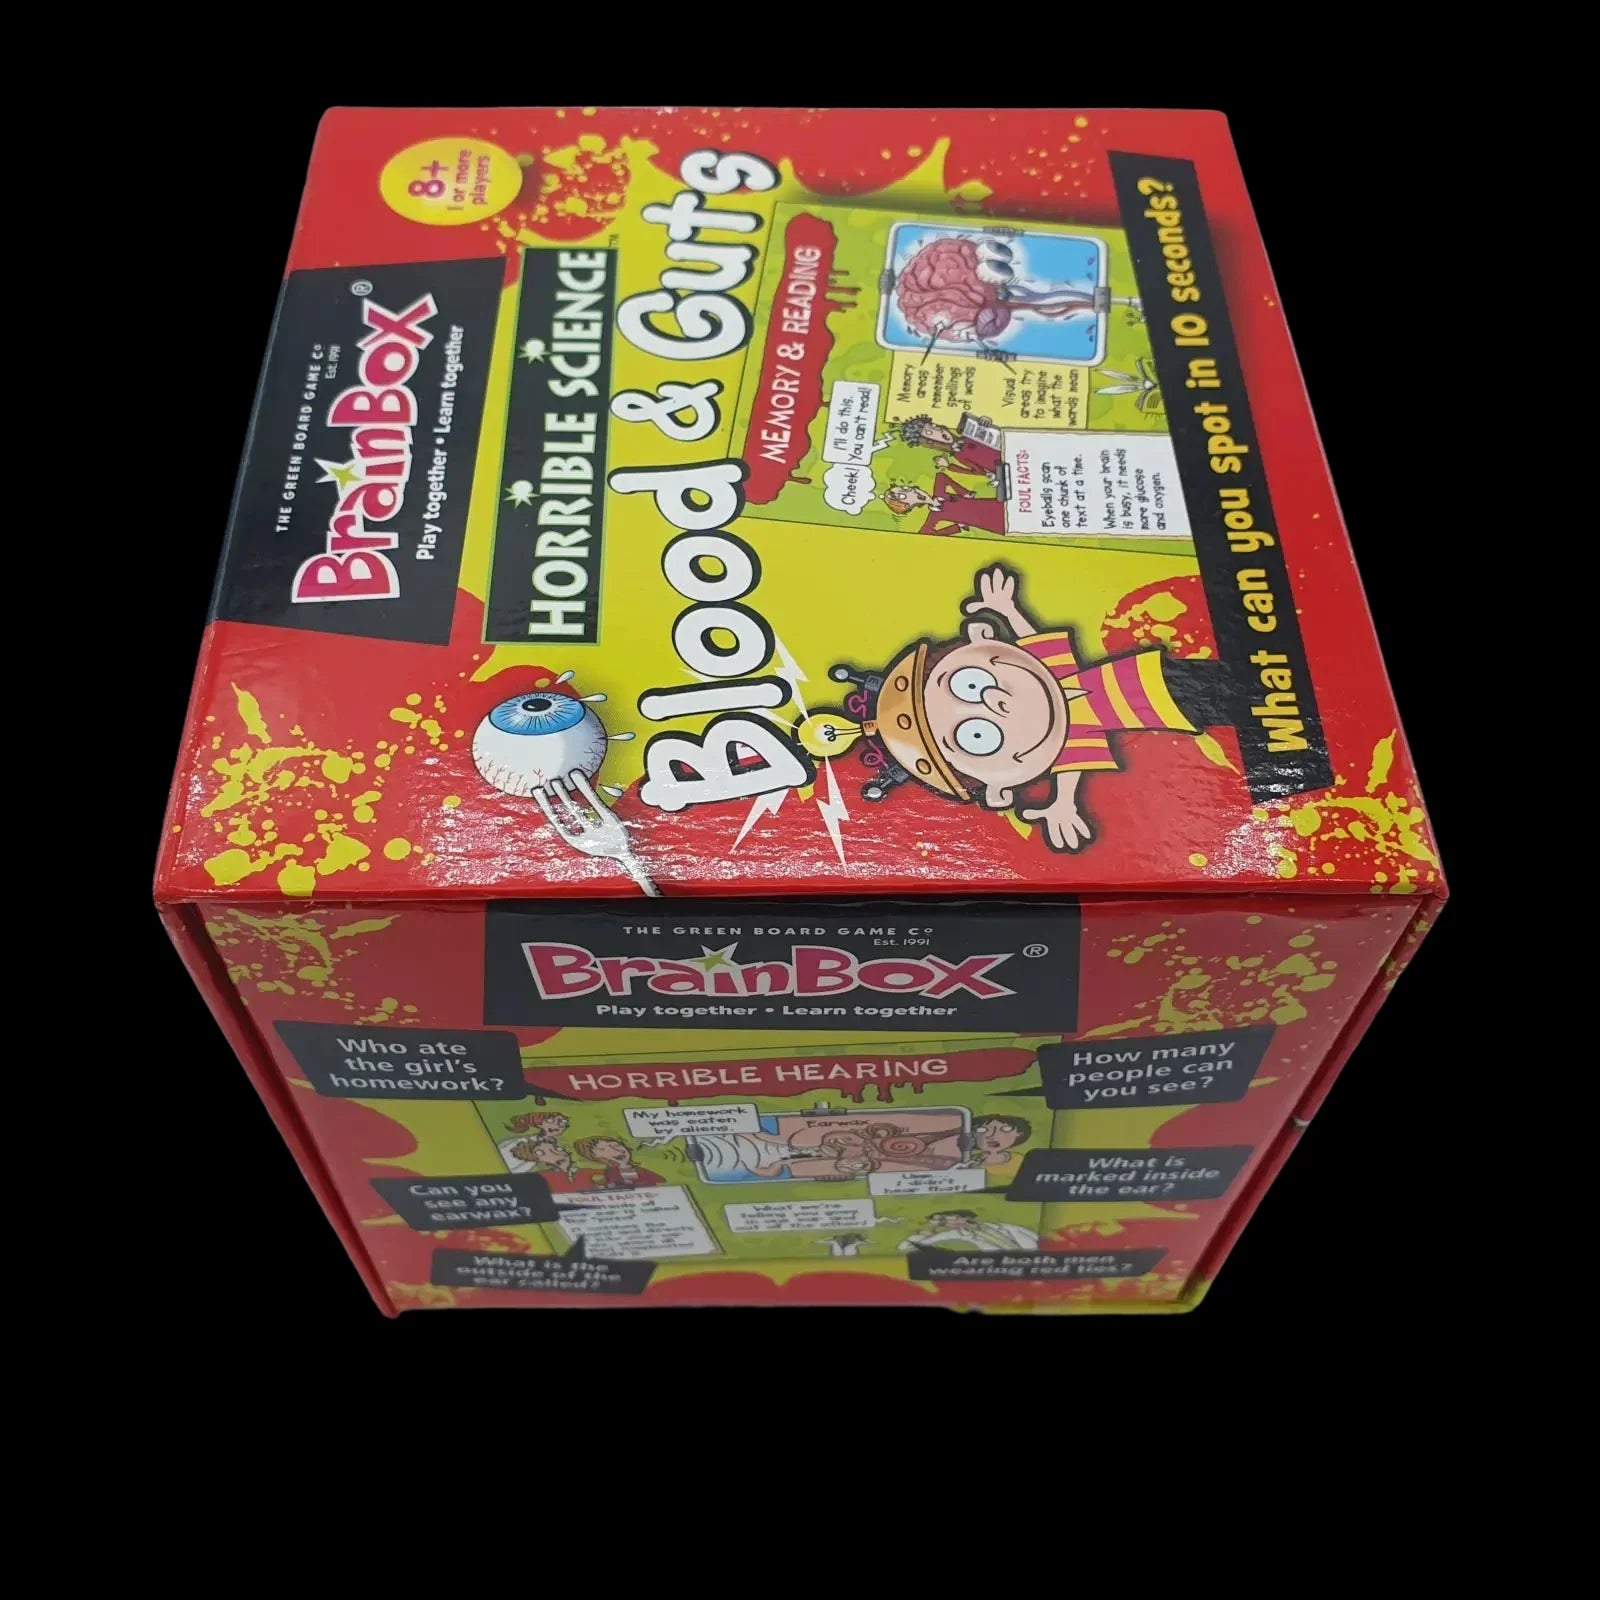 Brainbox Blood & Guts Boxed Board Game 2012 Age 8 + - Games